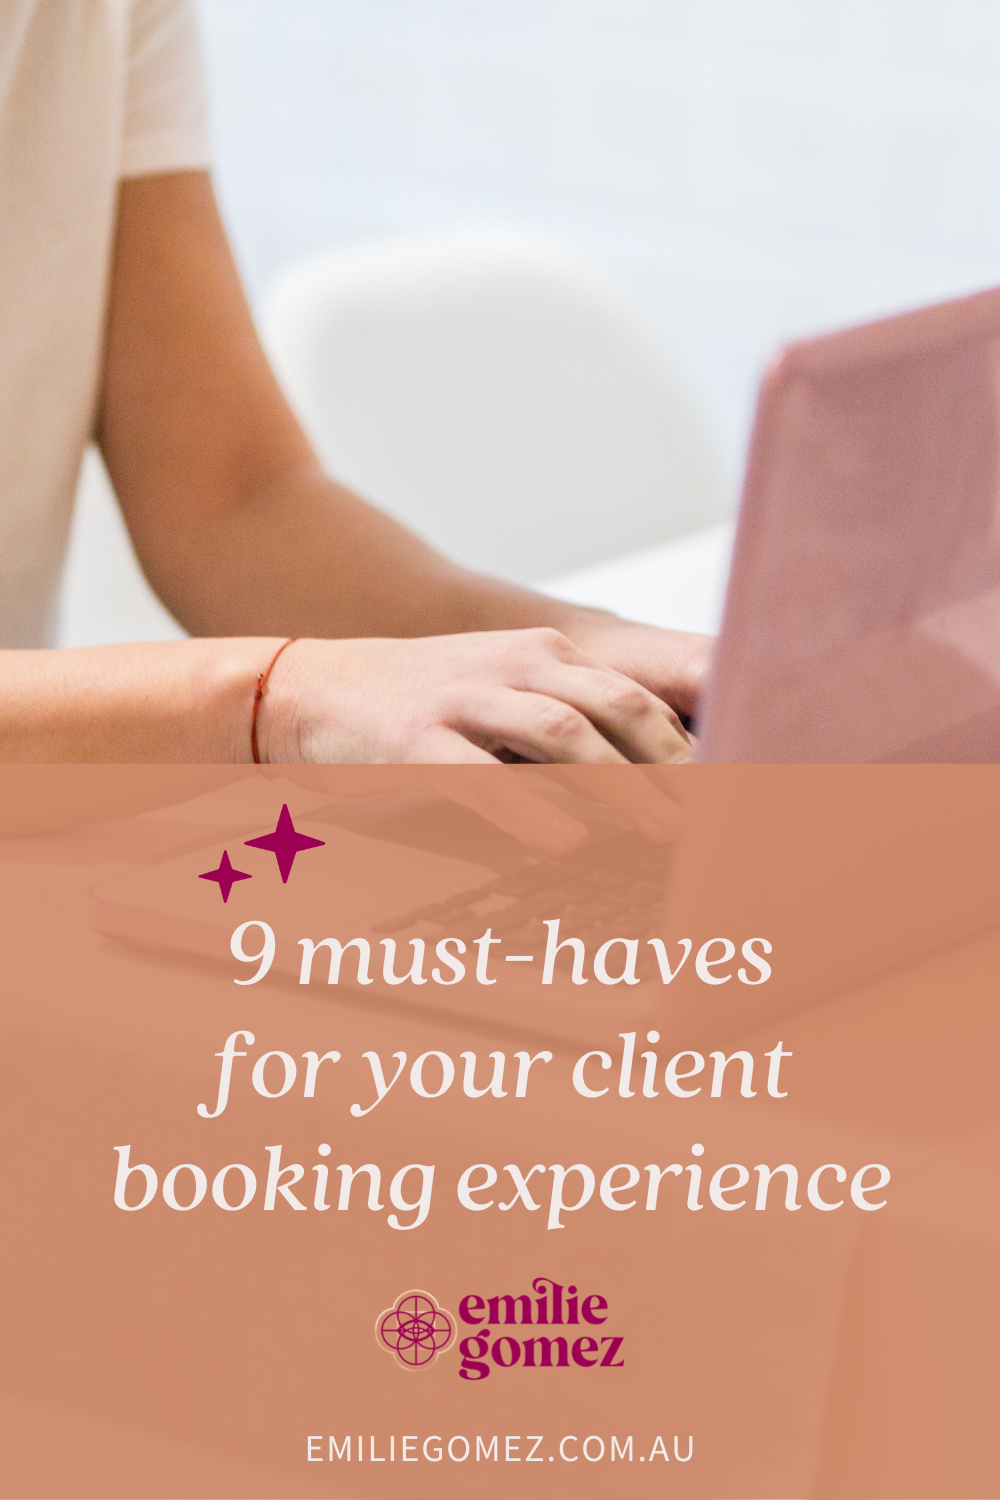 How do you ensure an amazing client experience right from the start? Get your client booking system set up right! So often, I see entrepreneurs make this process too hard and complicated, risking your potential clients not booking with you in the first place. Streamline your client booking process with these 9 must-haves for creating an amazing client booking experience. Make sure your potential clients can book with ease with these top tips from a business systems strategist!